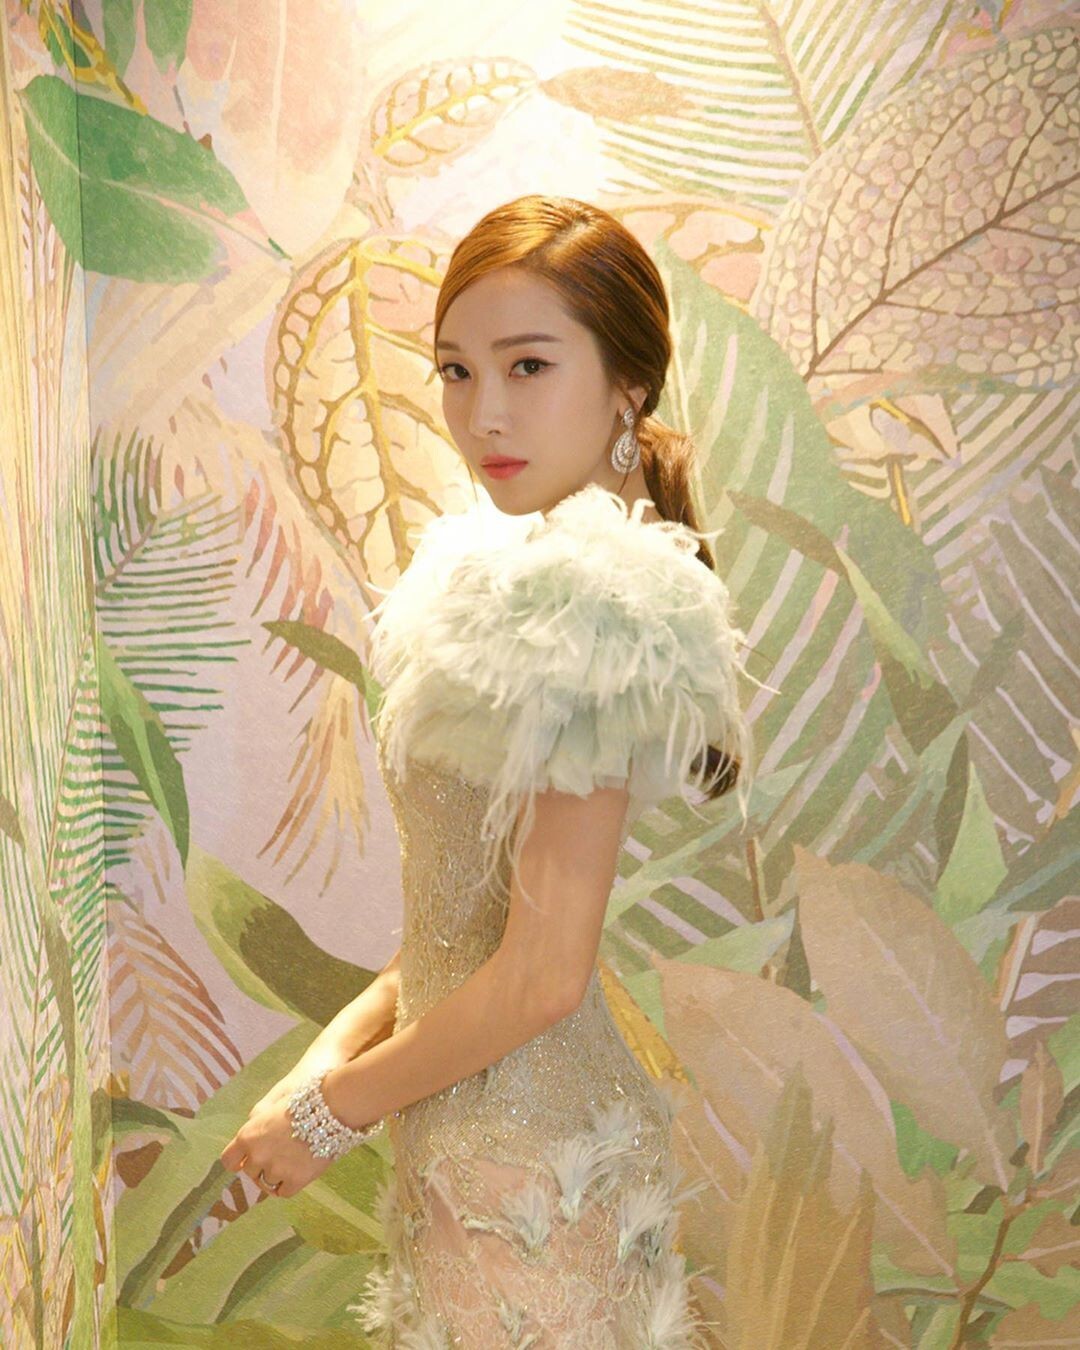 Since leaving Girls’ Generation, K-pop idol Jessica Jung has established herself as a fashion icon and notable designer. Photo: Instagram